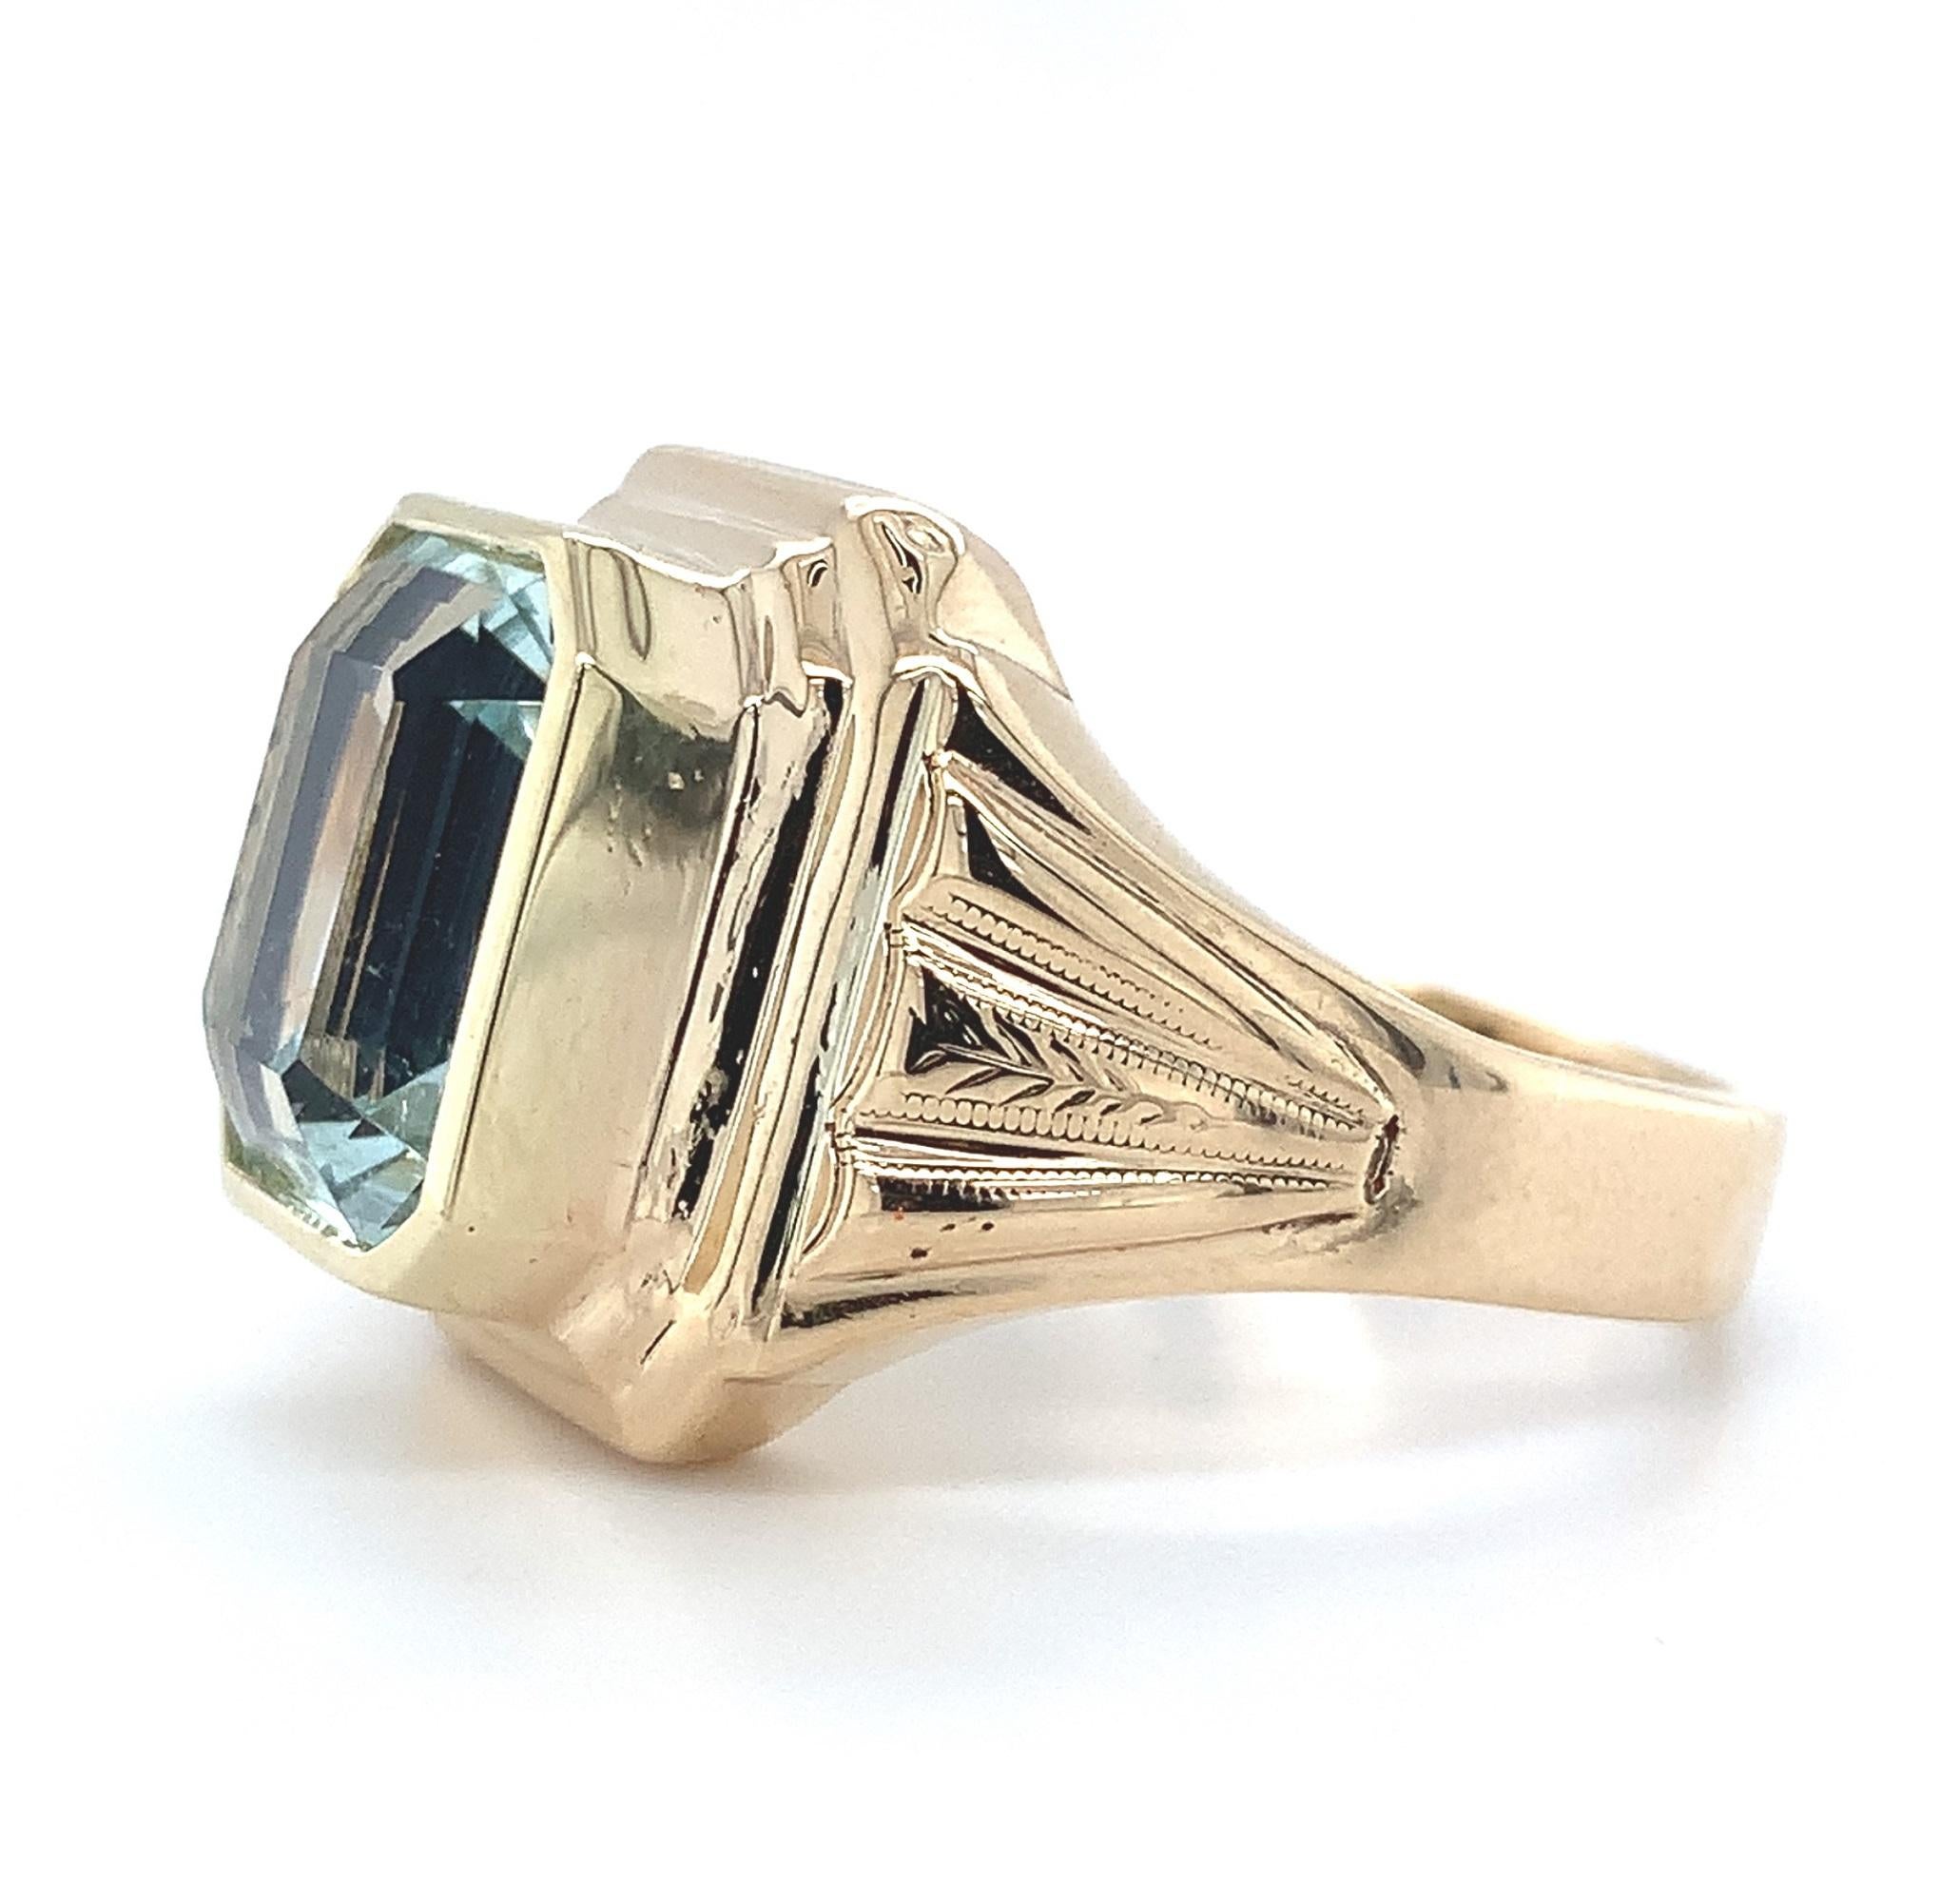 10K yellow gold men's ring featuring a large emerald cut aquamarine weighing 5.53 carats. The aquamarine measures about 11.5mm x 9.5mm and is set in a new bezel. The ring fits a size 9 finger and weighs 4.31dwt. It dates from the 1940's.